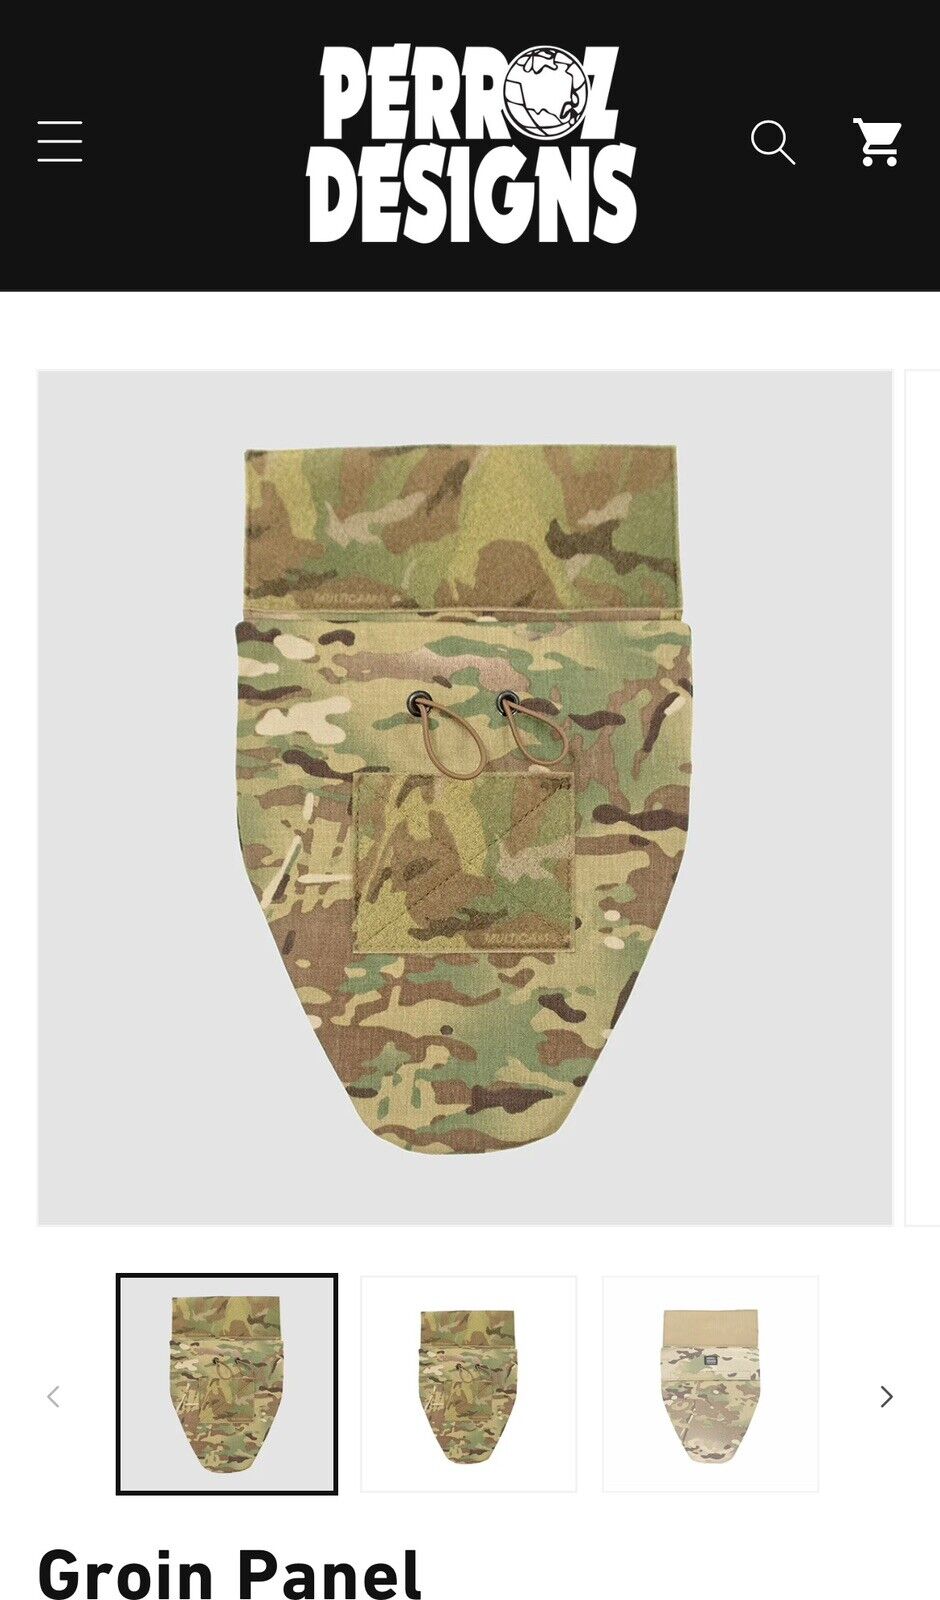 Perroz Designs Groin Panel 10”by 11.5” LEVEL IIIa SOFT ARMOR